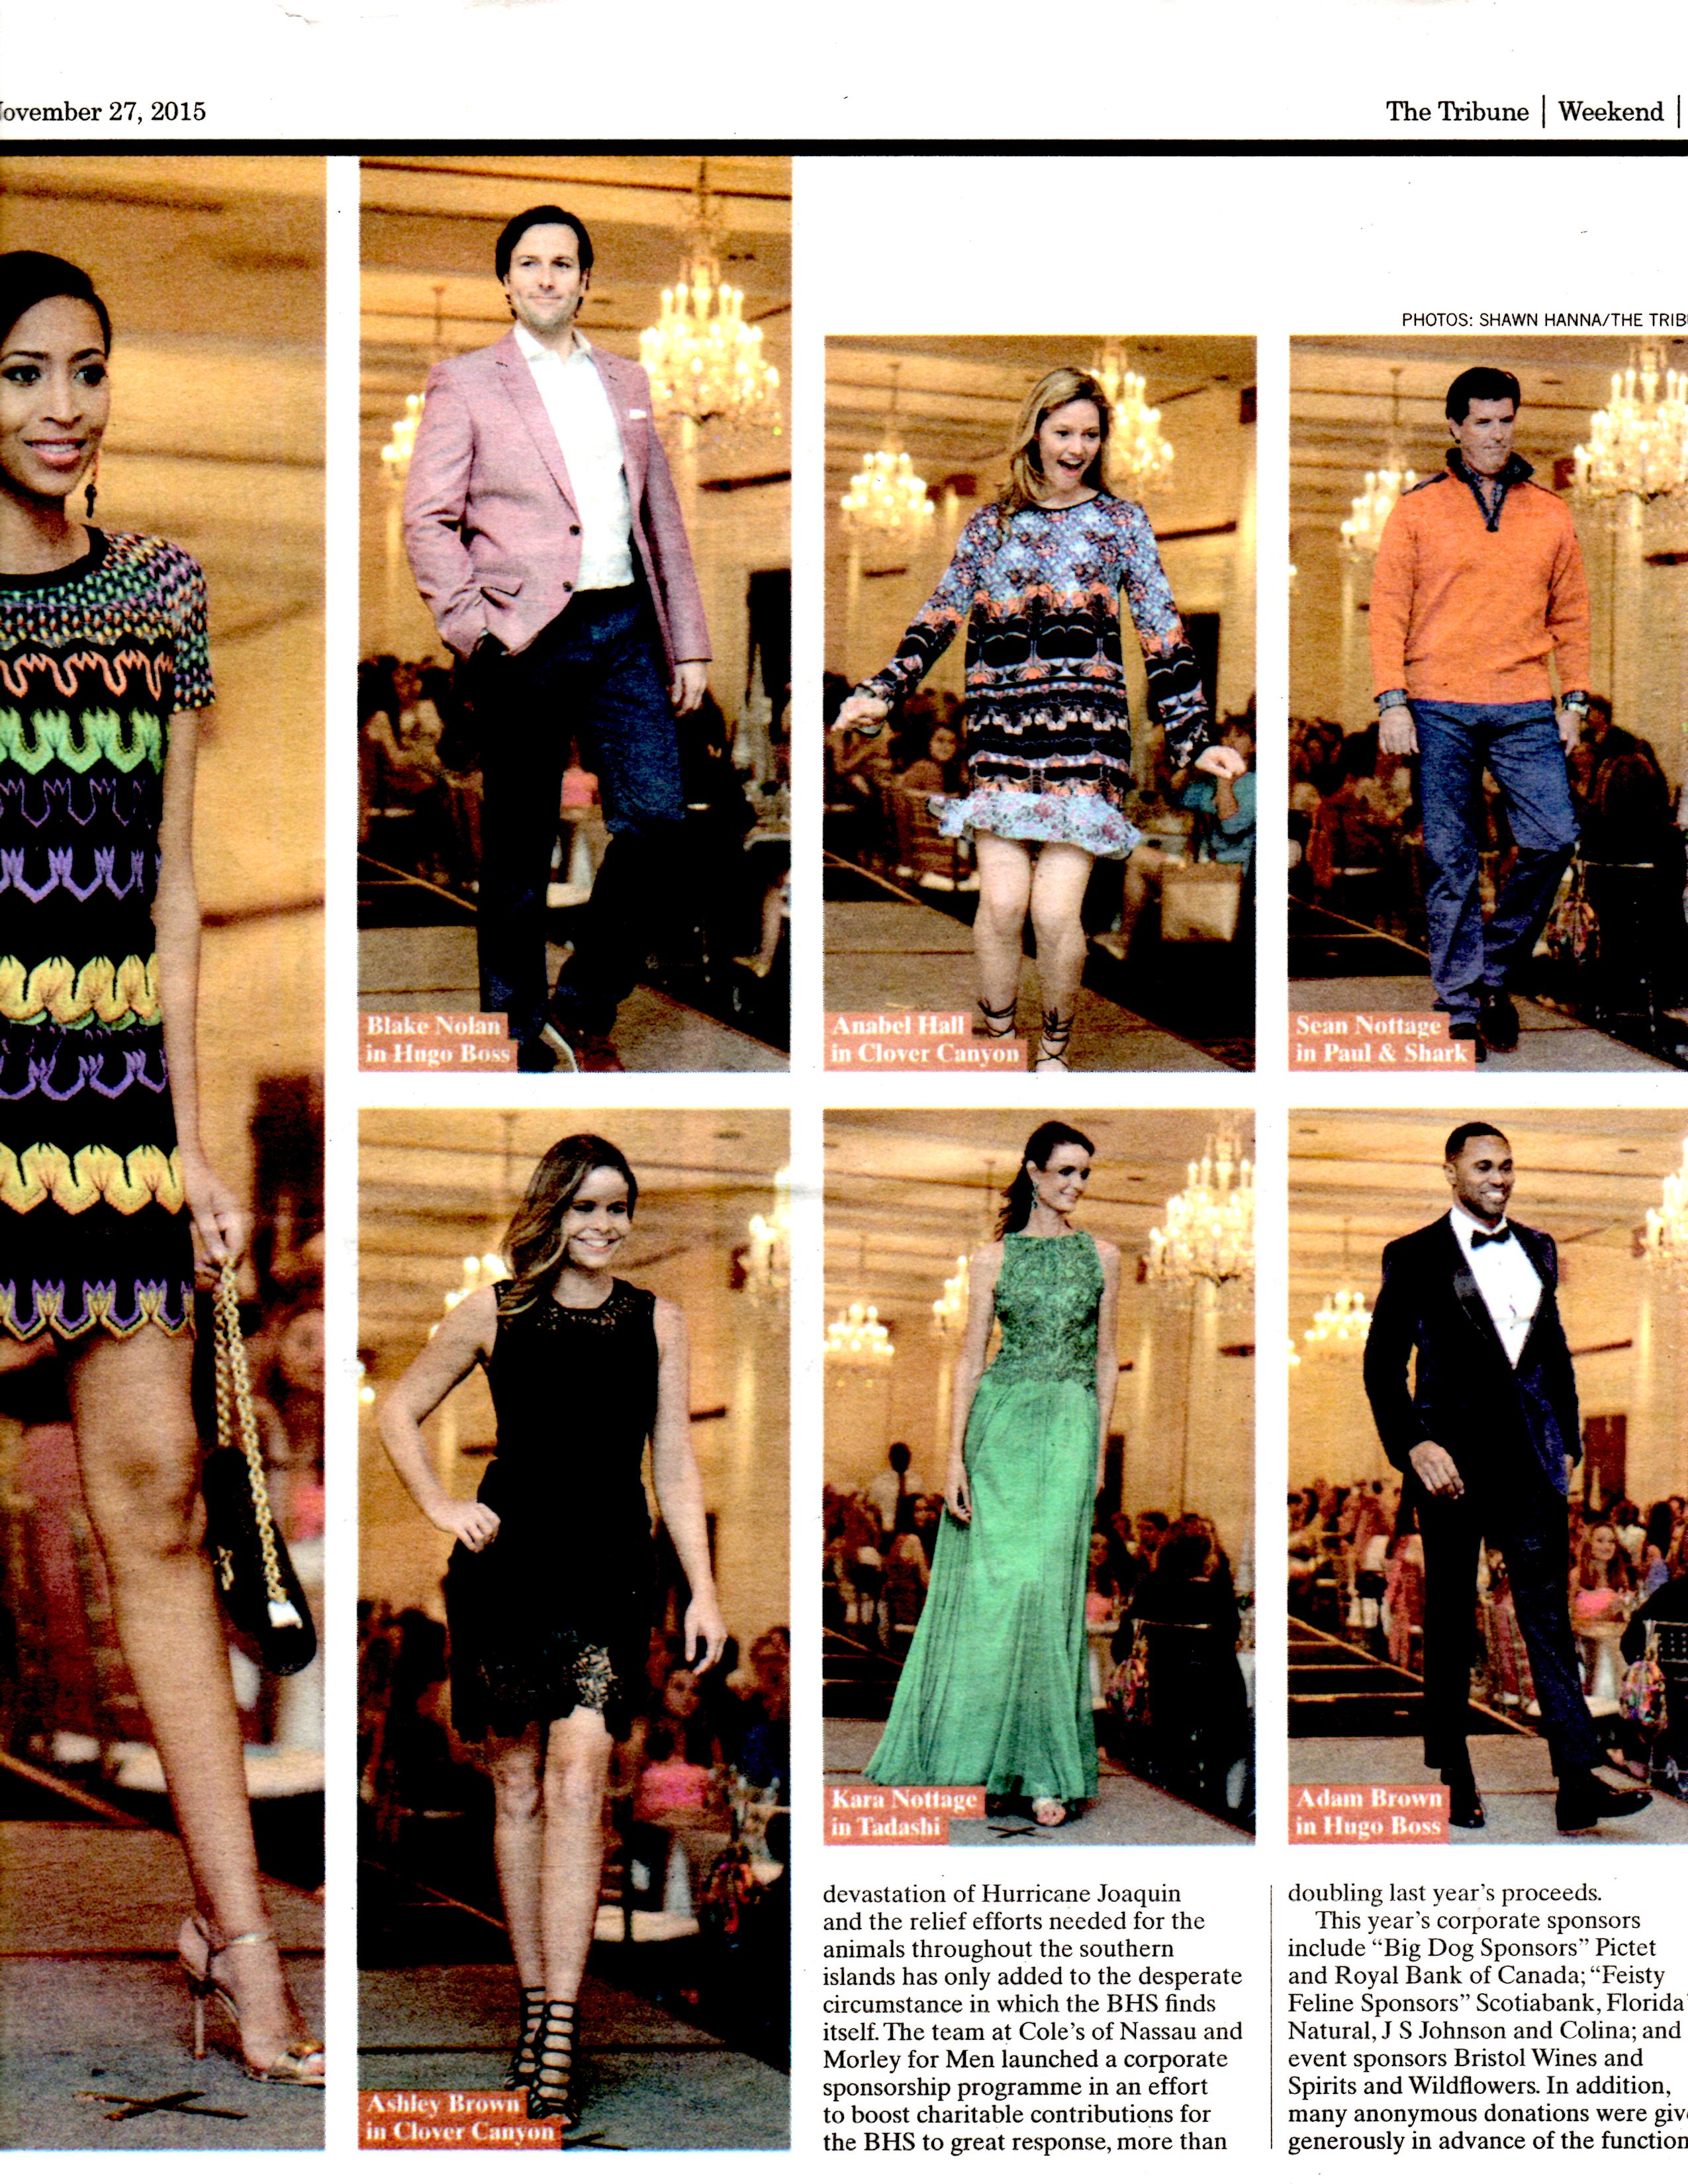 Modeling Hugo Boss tuxedo at Cole's of Nassau & Morley for Men fashion show in aid of the Bahamas Humane Society. Show held on Tuesday, 24th November, 2015 at The Hilton Hotel, Nassau, Bahamas. Photos published in The Tribune Newspaper - Weekend Edition.